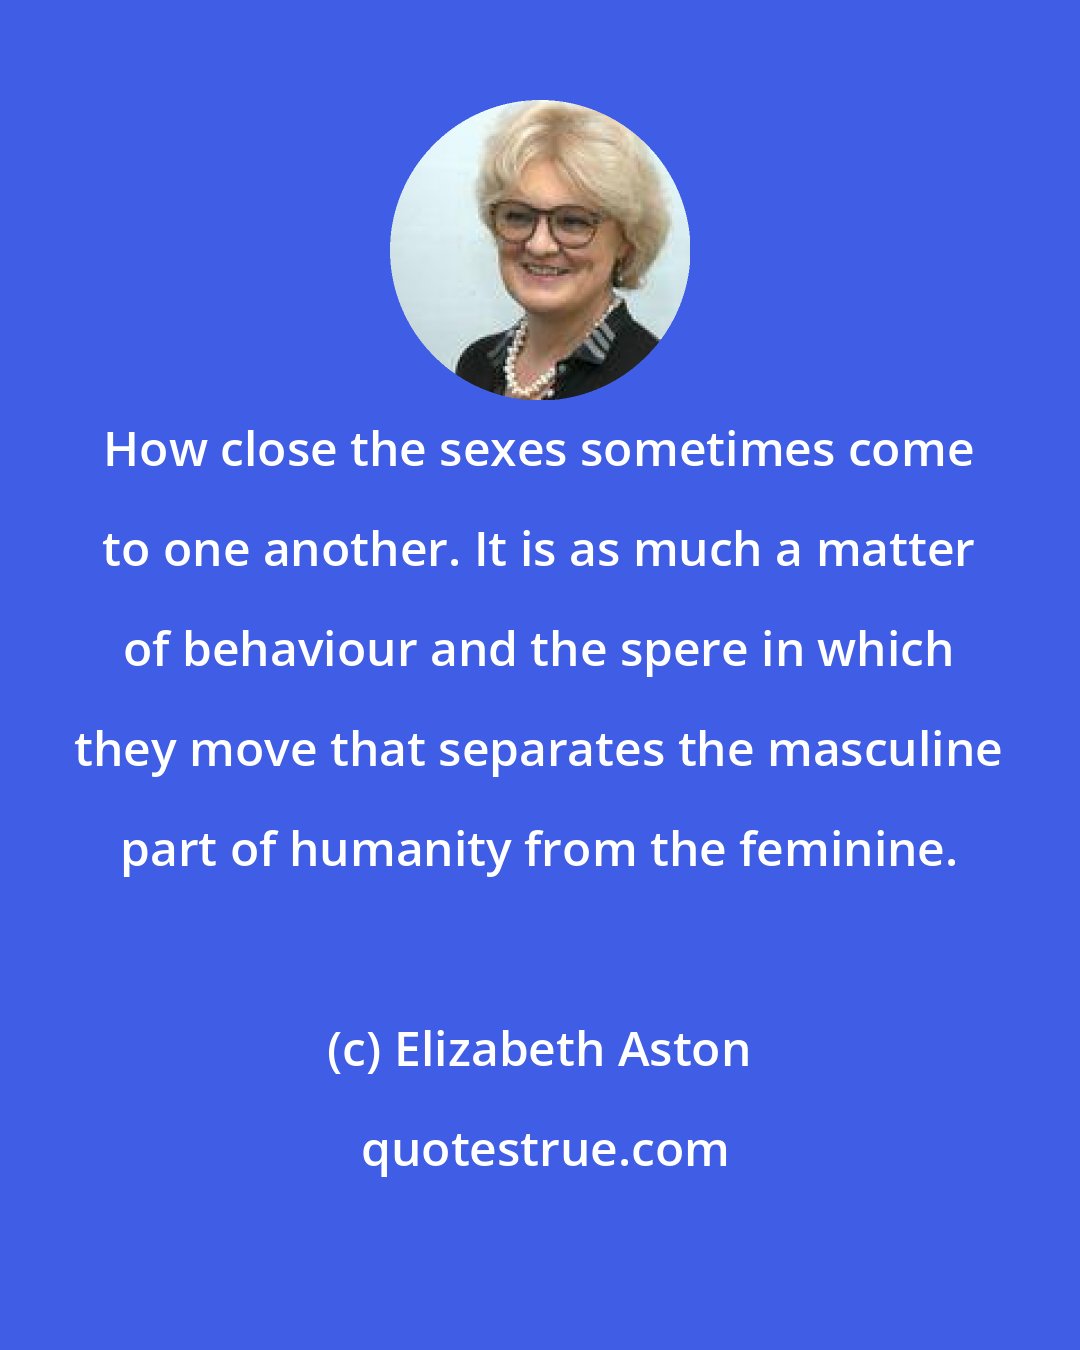 Elizabeth Aston: How close the sexes sometimes come to one another. It is as much a matter of behaviour and the spere in which they move that separates the masculine part of humanity from the feminine.